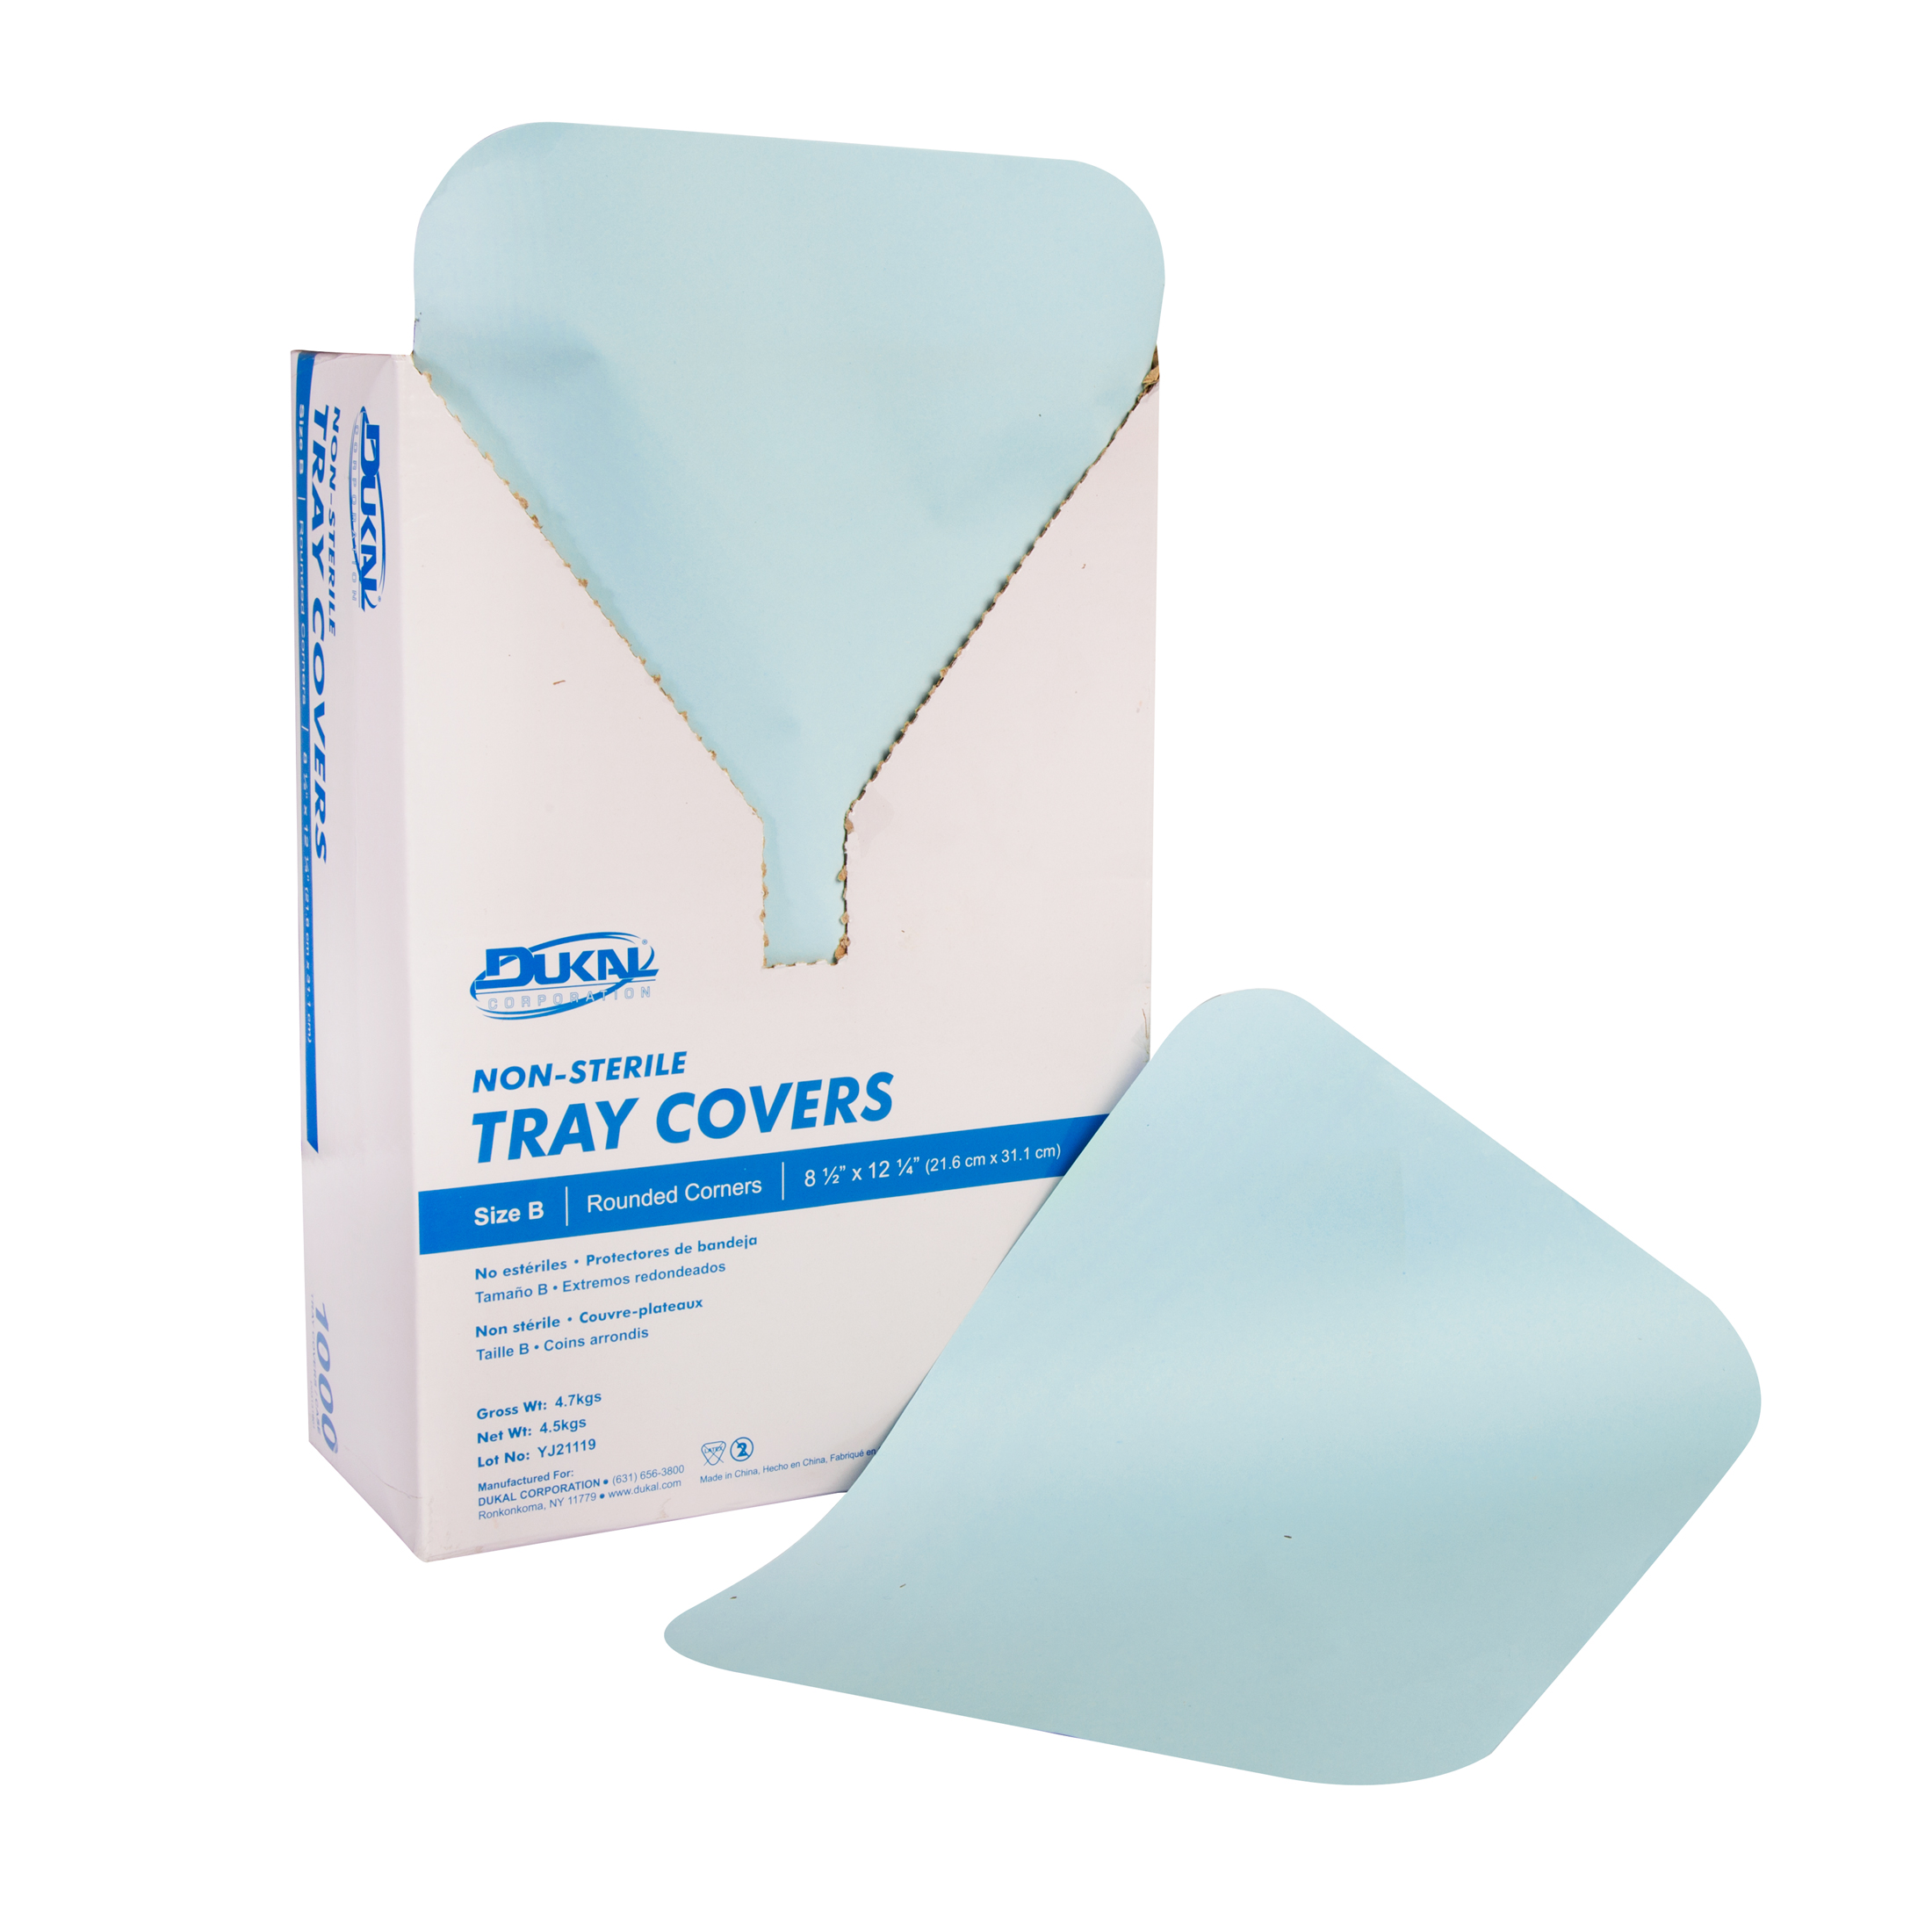 Tray Covers Products, Supplies and Equipment